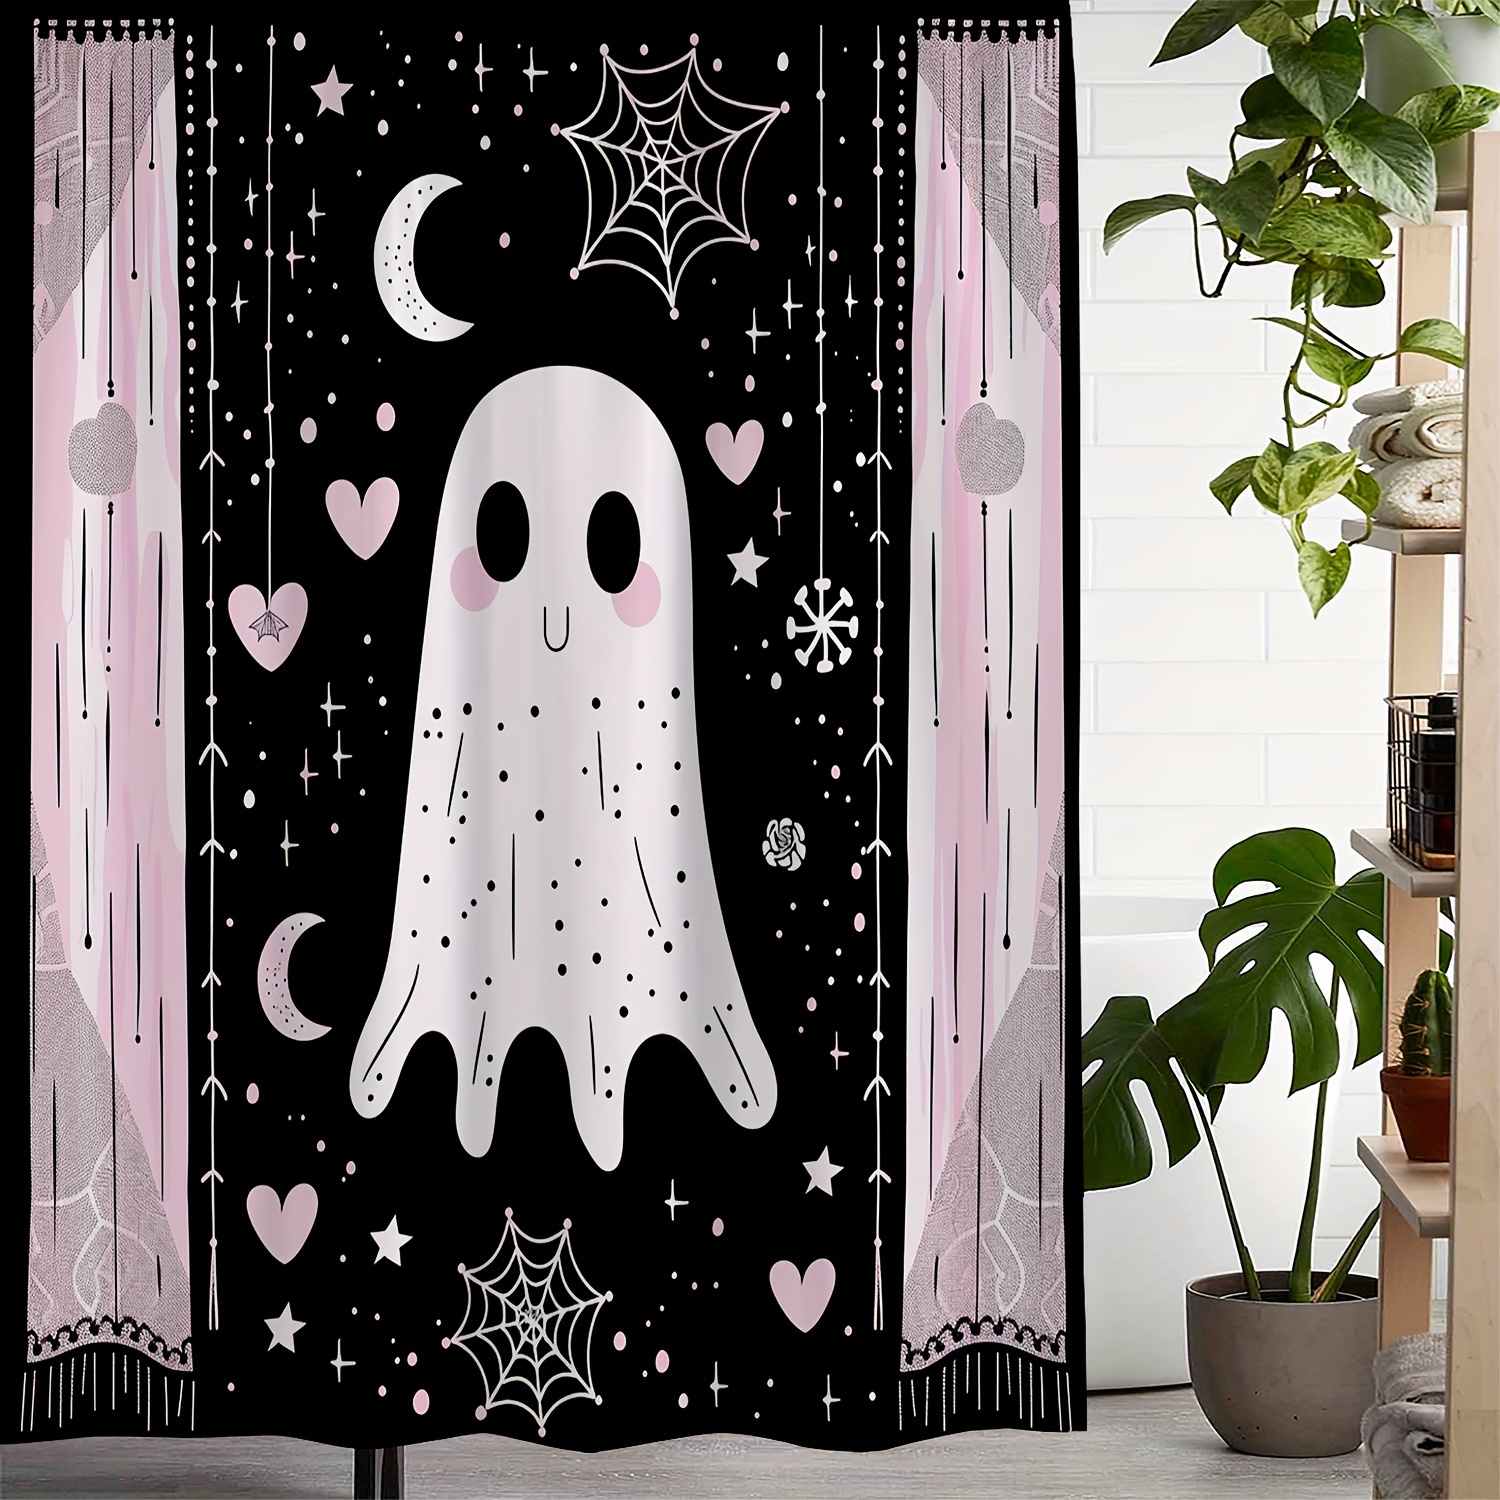 

Ultimate Waterproof Halloween Ghost Moon Shower Curtain - 72"x72" (183cmx183cm) - Artistic Design, Machine Washable, 12 Hooks Included, Perfect For Windows And Bathrooms